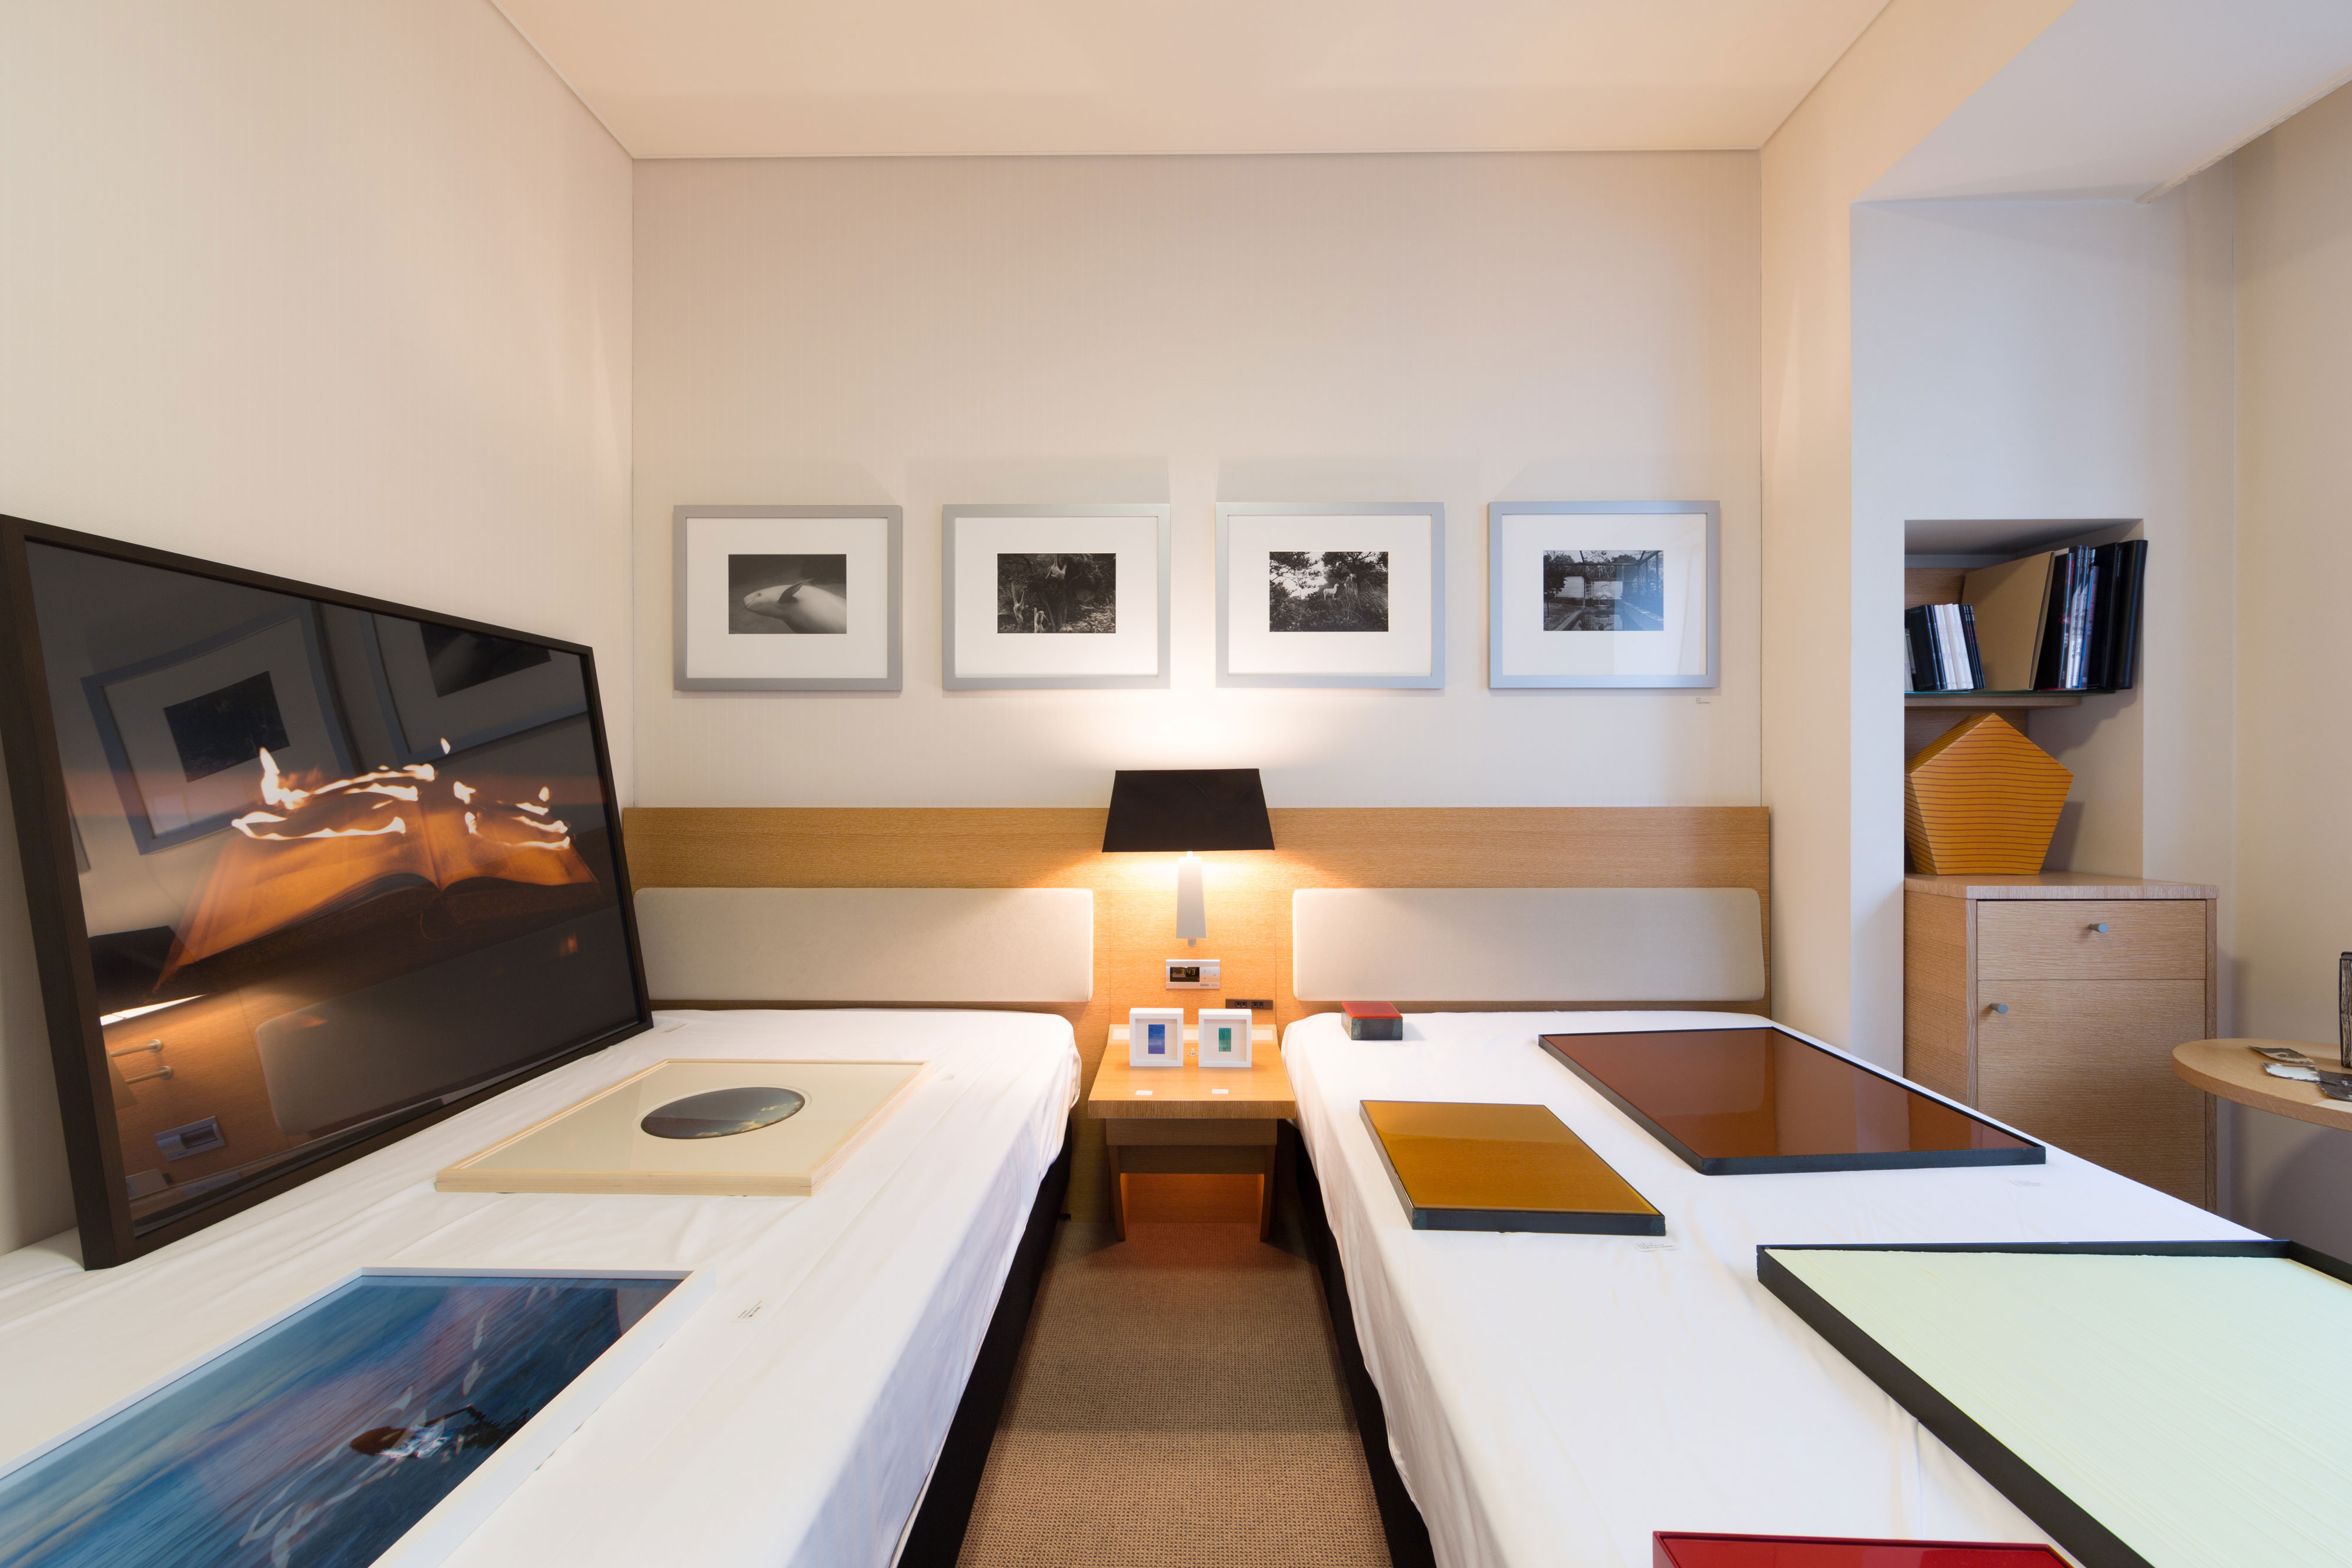 Contemporary Art Fair “ART in PARK HOTEL TOKYO 2018” to Be Held at Park